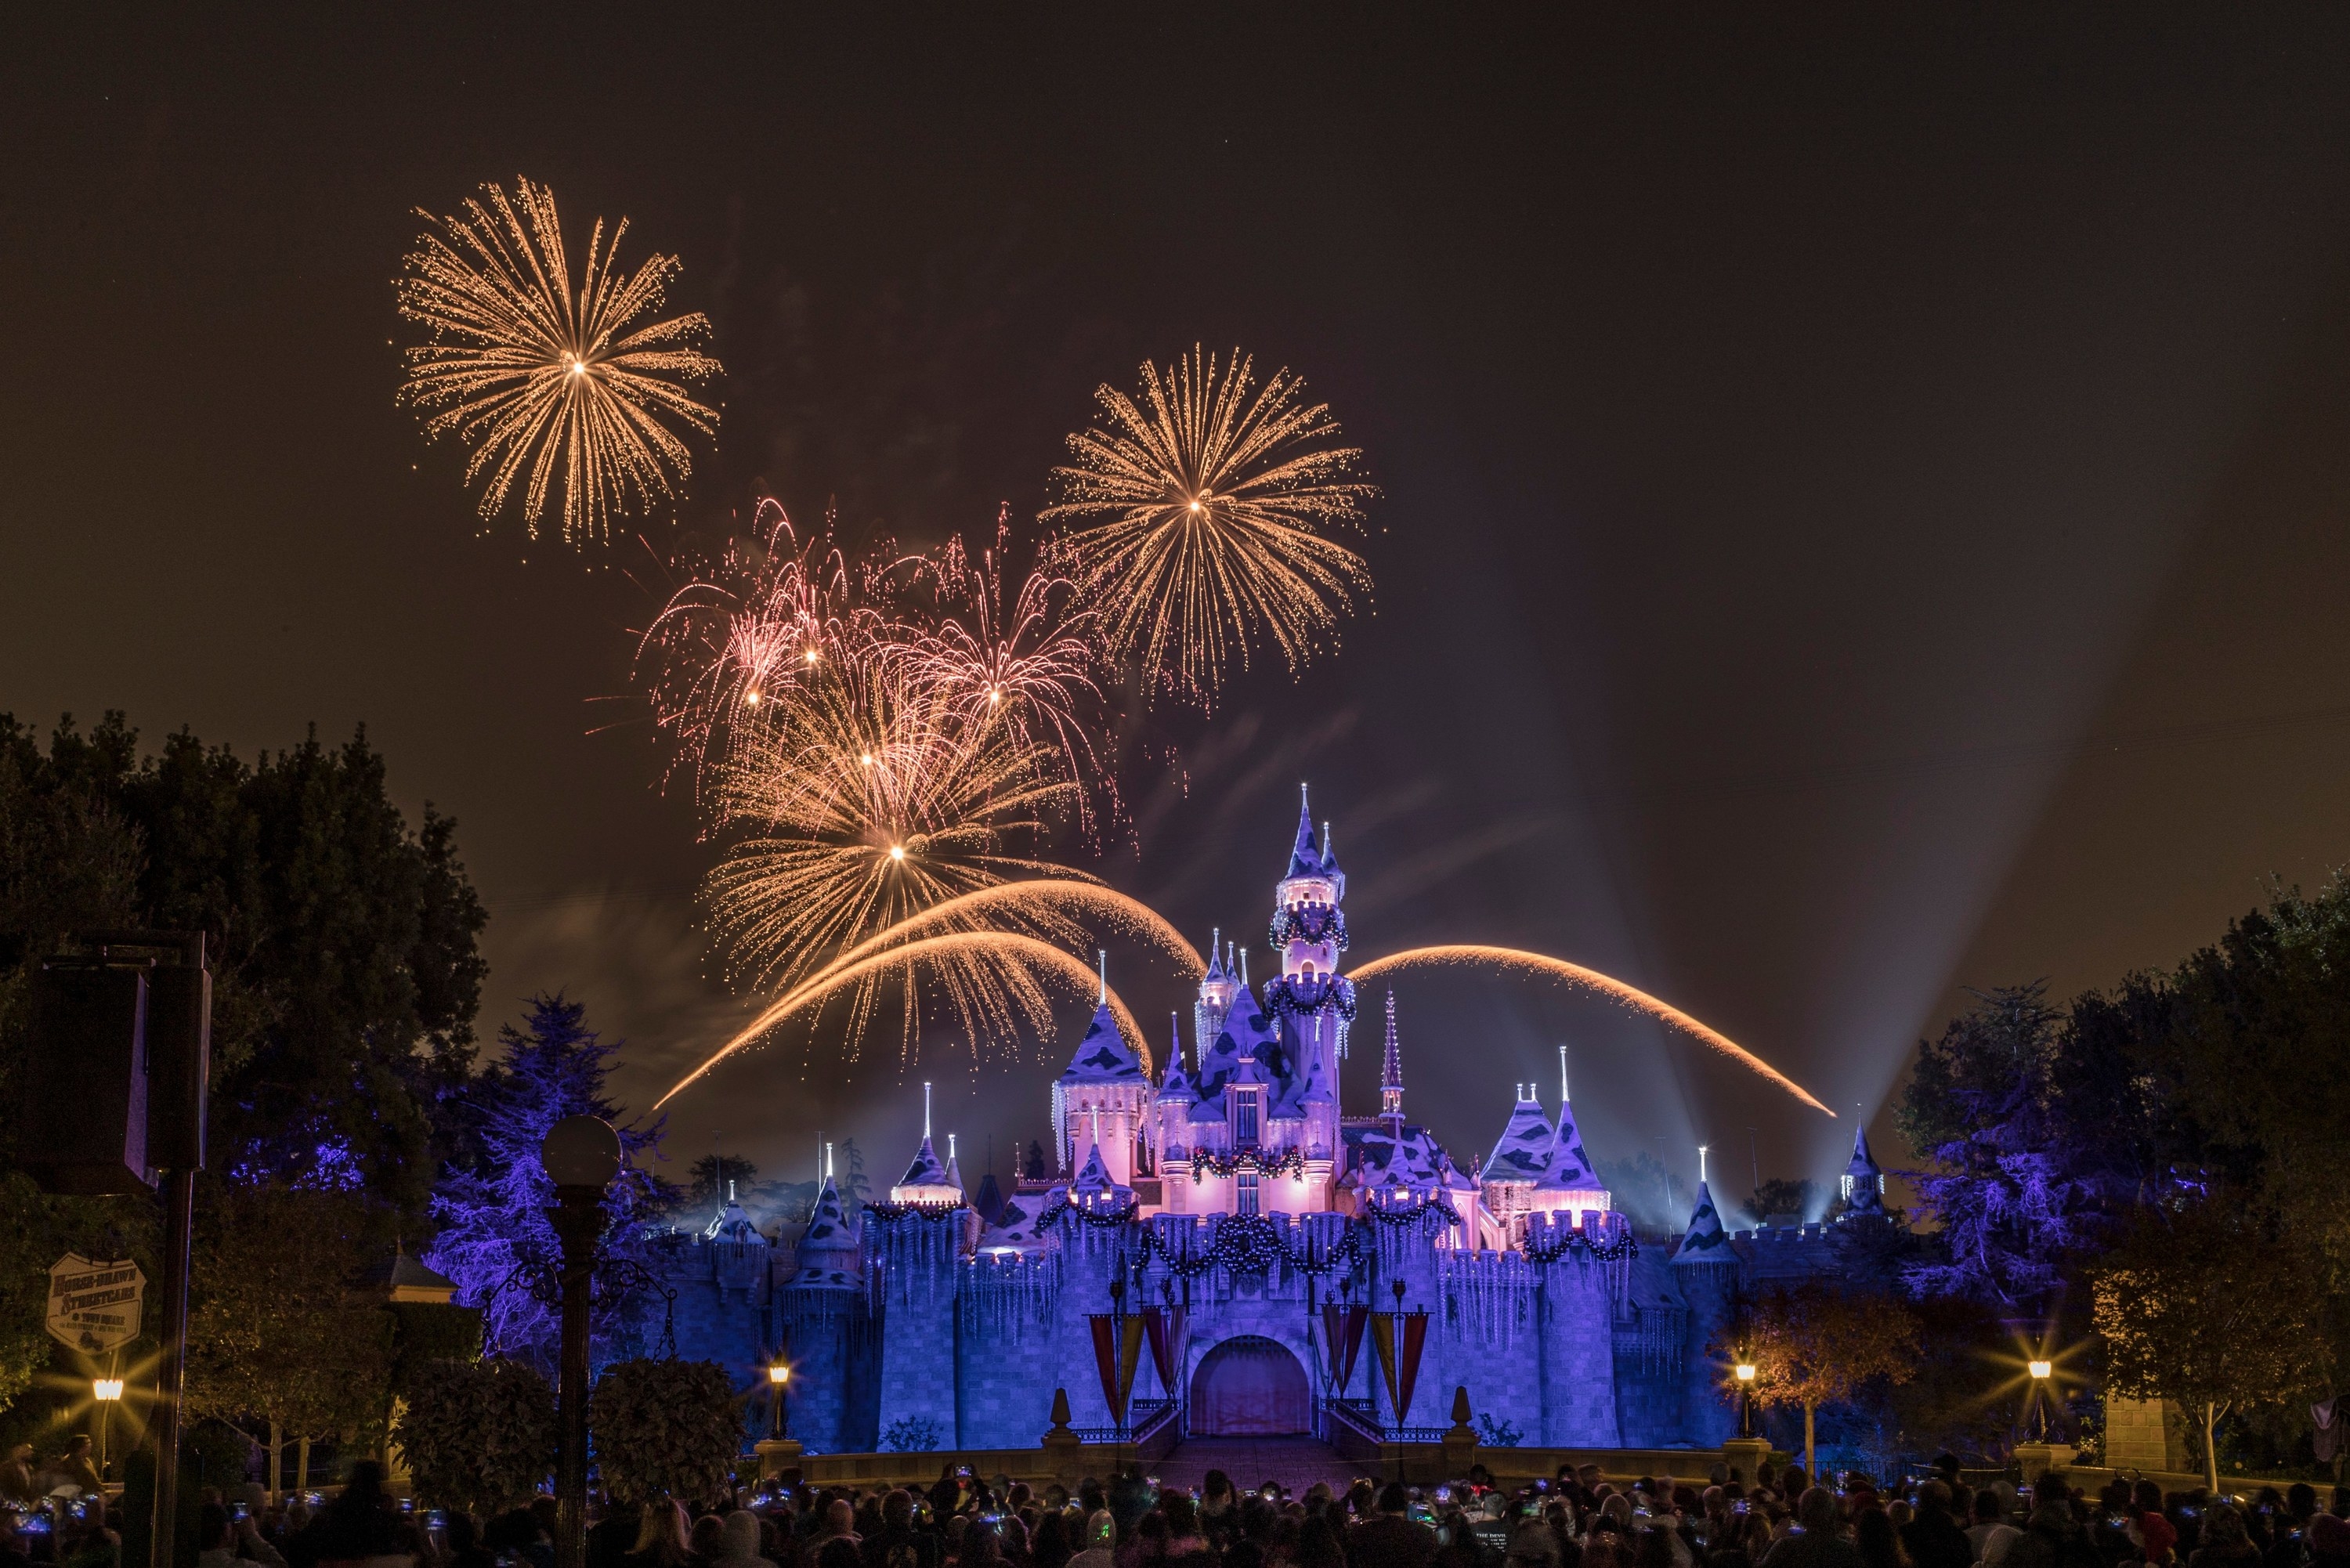 Fireworks going off over the castle